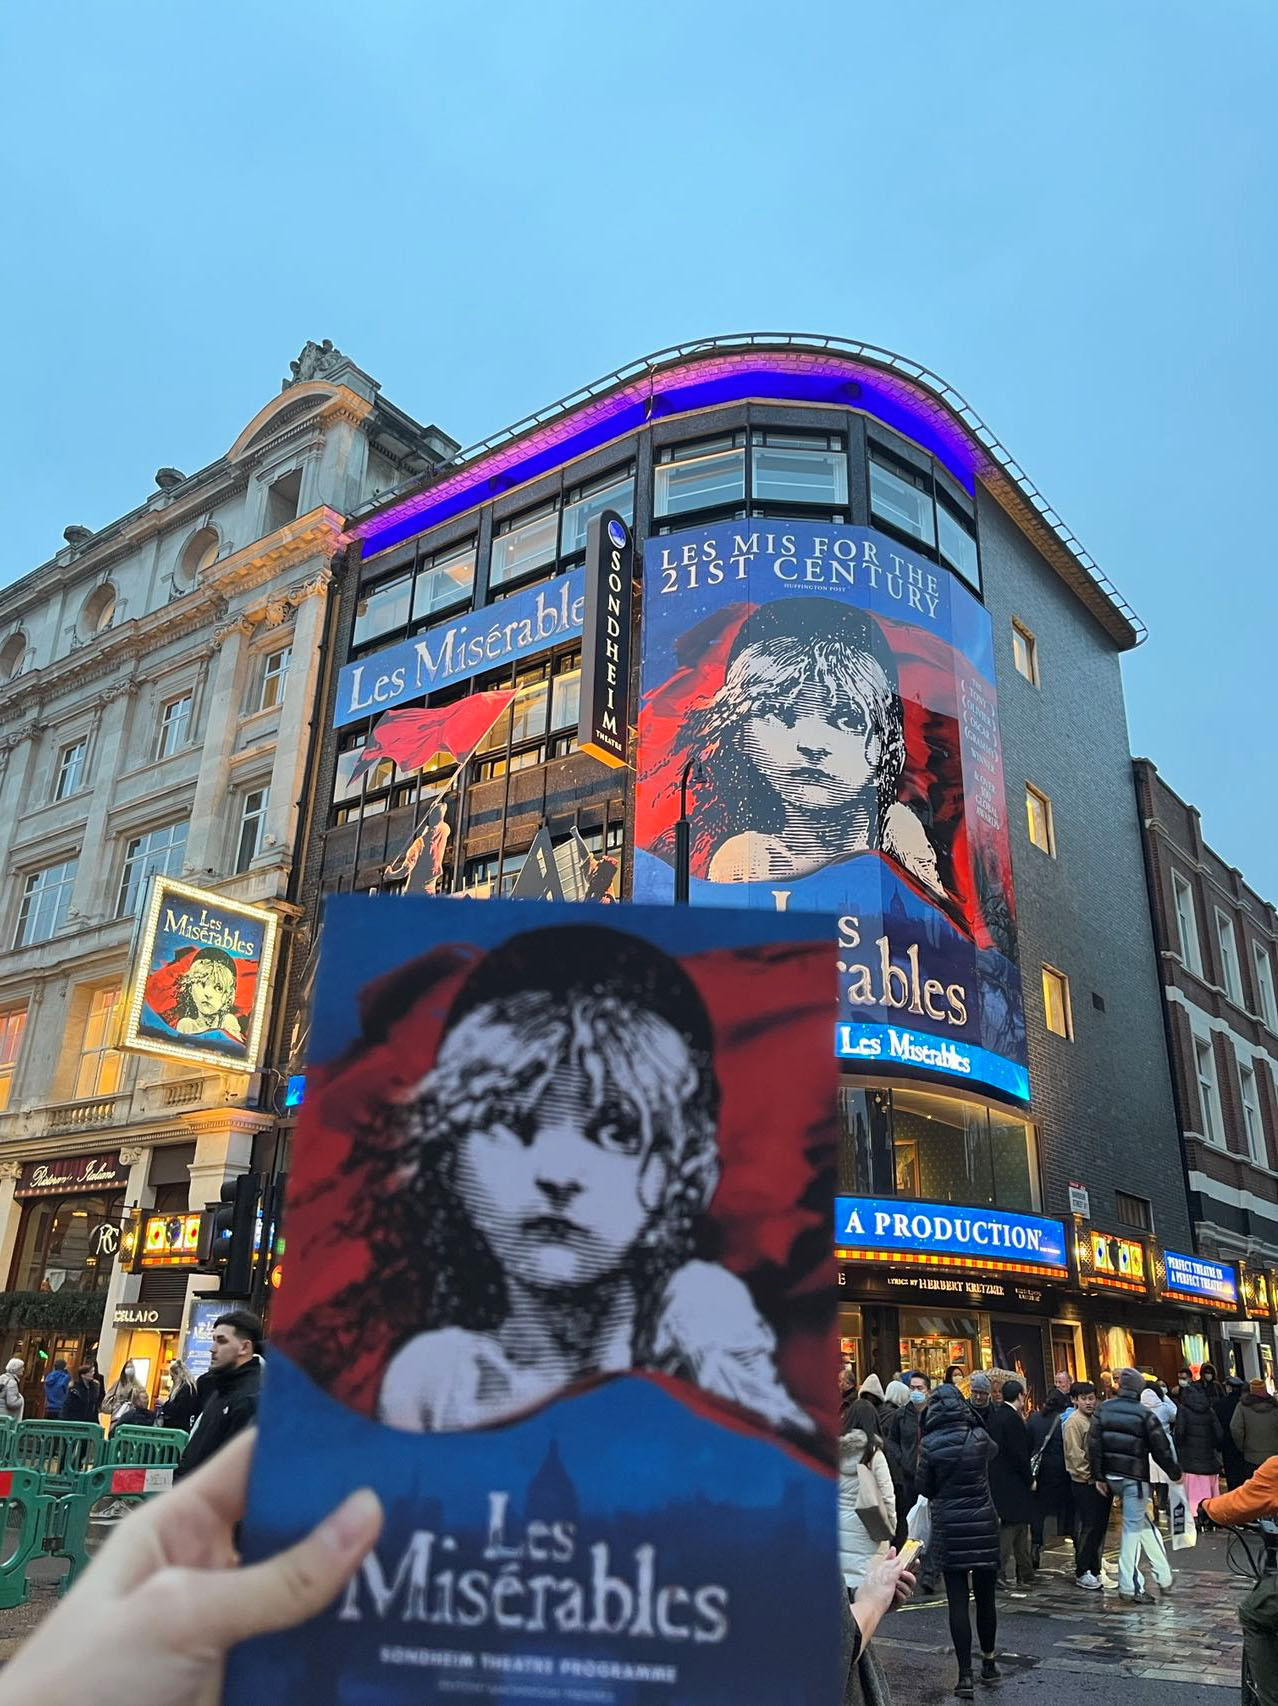 One of the London's best musicals - Les Miserables